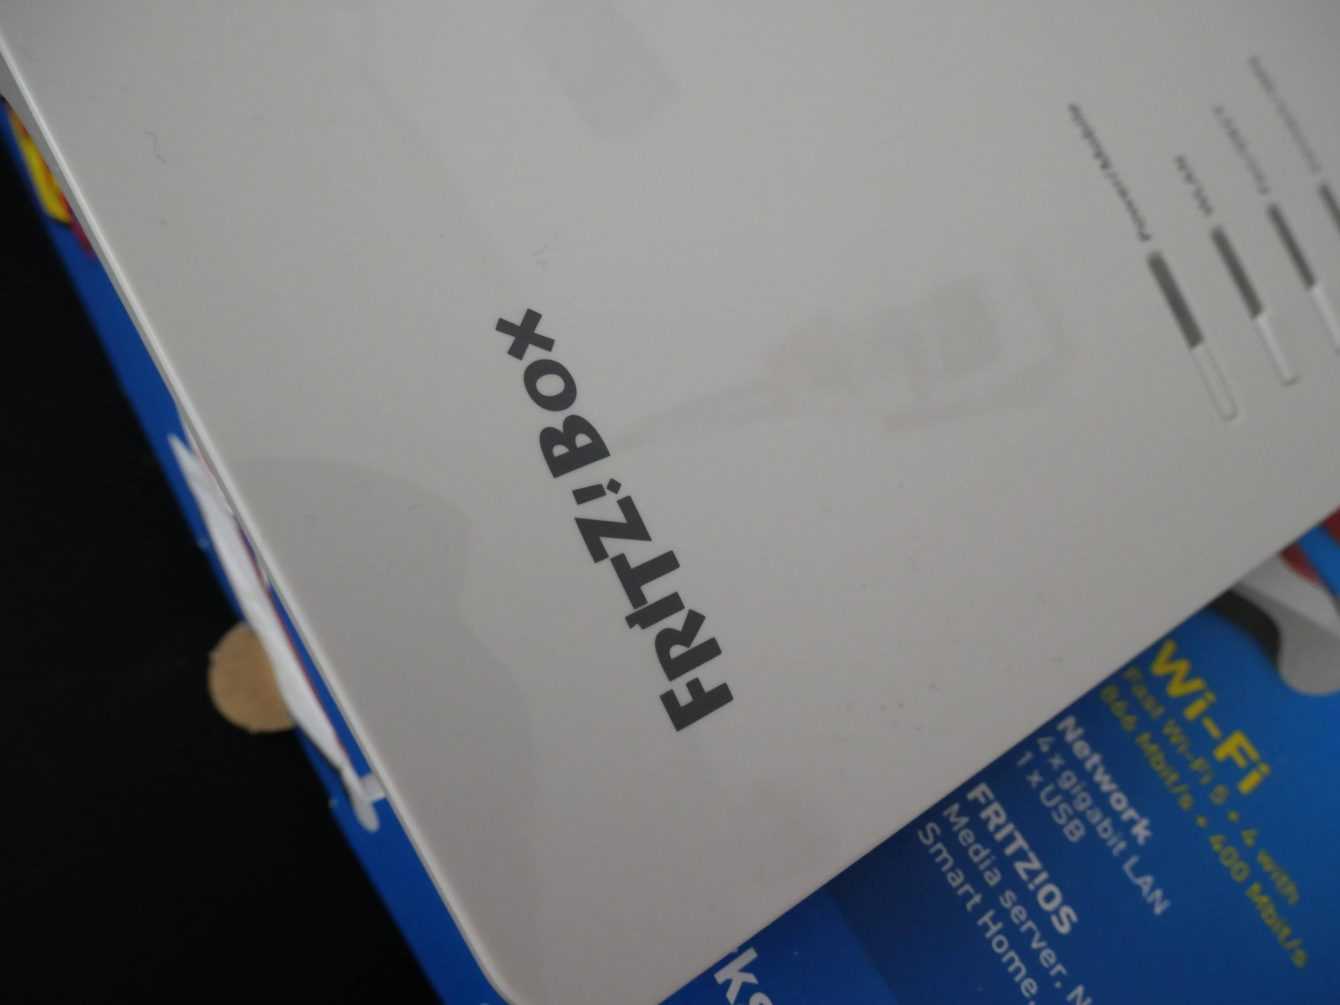 FRITZ! Box 6850 LTE review: the best buy for LTE networks?